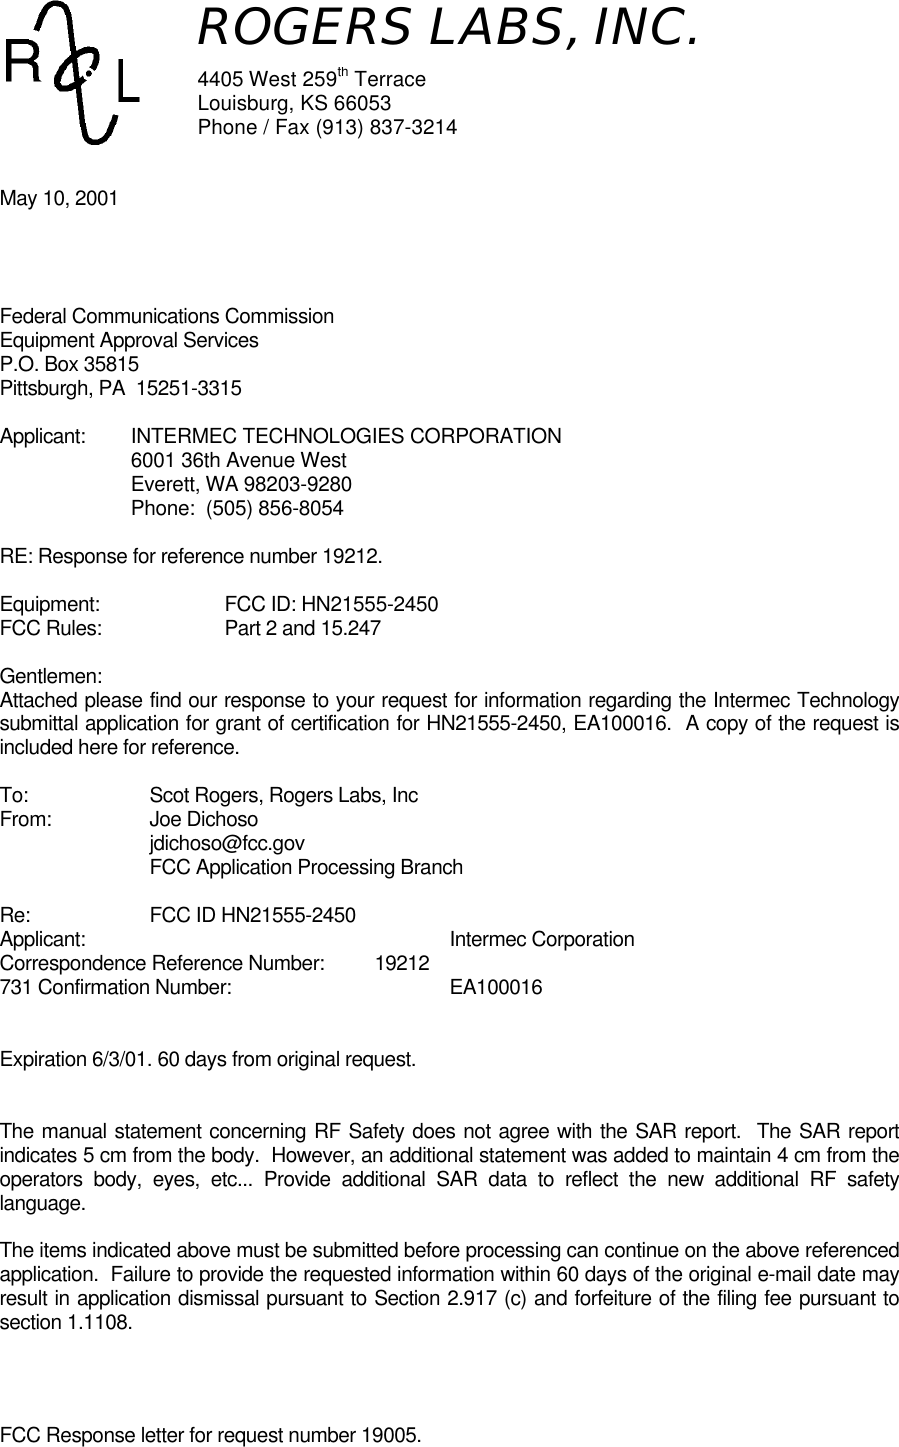 FCC Response letter for request number 19005.May 10, 2001Federal Communications CommissionEquipment Approval ServicesP.O. Box 35815Pittsburgh, PA  15251-3315Applicant: INTERMEC TECHNOLOGIES CORPORATION6001 36th Avenue WestEverett, WA 98203-9280Phone:  (505) 856-8054RE: Response for reference number 19212.Equipment: FCC ID: HN21555-2450FCC Rules: Part 2 and 15.247Gentlemen:Attached please find our response to your request for information regarding the Intermec Technologysubmittal application for grant of certification for HN21555-2450, EA100016.  A copy of the request isincluded here for reference.To: Scot Rogers, Rogers Labs, IncFrom: Joe Dichosojdichoso@fcc.govFCC Application Processing BranchRe: FCC ID HN21555-2450Applicant: Intermec CorporationCorrespondence Reference Number: 19212731 Confirmation Number: EA100016Expiration 6/3/01. 60 days from original request.The manual statement concerning RF Safety does not agree with the SAR report.  The SAR reportindicates 5 cm from the body.  However, an additional statement was added to maintain 4 cm from theoperators body, eyes, etc... Provide additional SAR data to reflect the new additional RF safetylanguage.The items indicated above must be submitted before processing can continue on the above referencedapplication.  Failure to provide the requested information within 60 days of the original e-mail date mayresult in application dismissal pursuant to Section 2.917 (c) and forfeiture of the filing fee pursuant tosection 1.1108.ROGERS LABS, INC.4405 West 259th TerraceLouisburg, KS 66053Phone / Fax (913) 837-3214